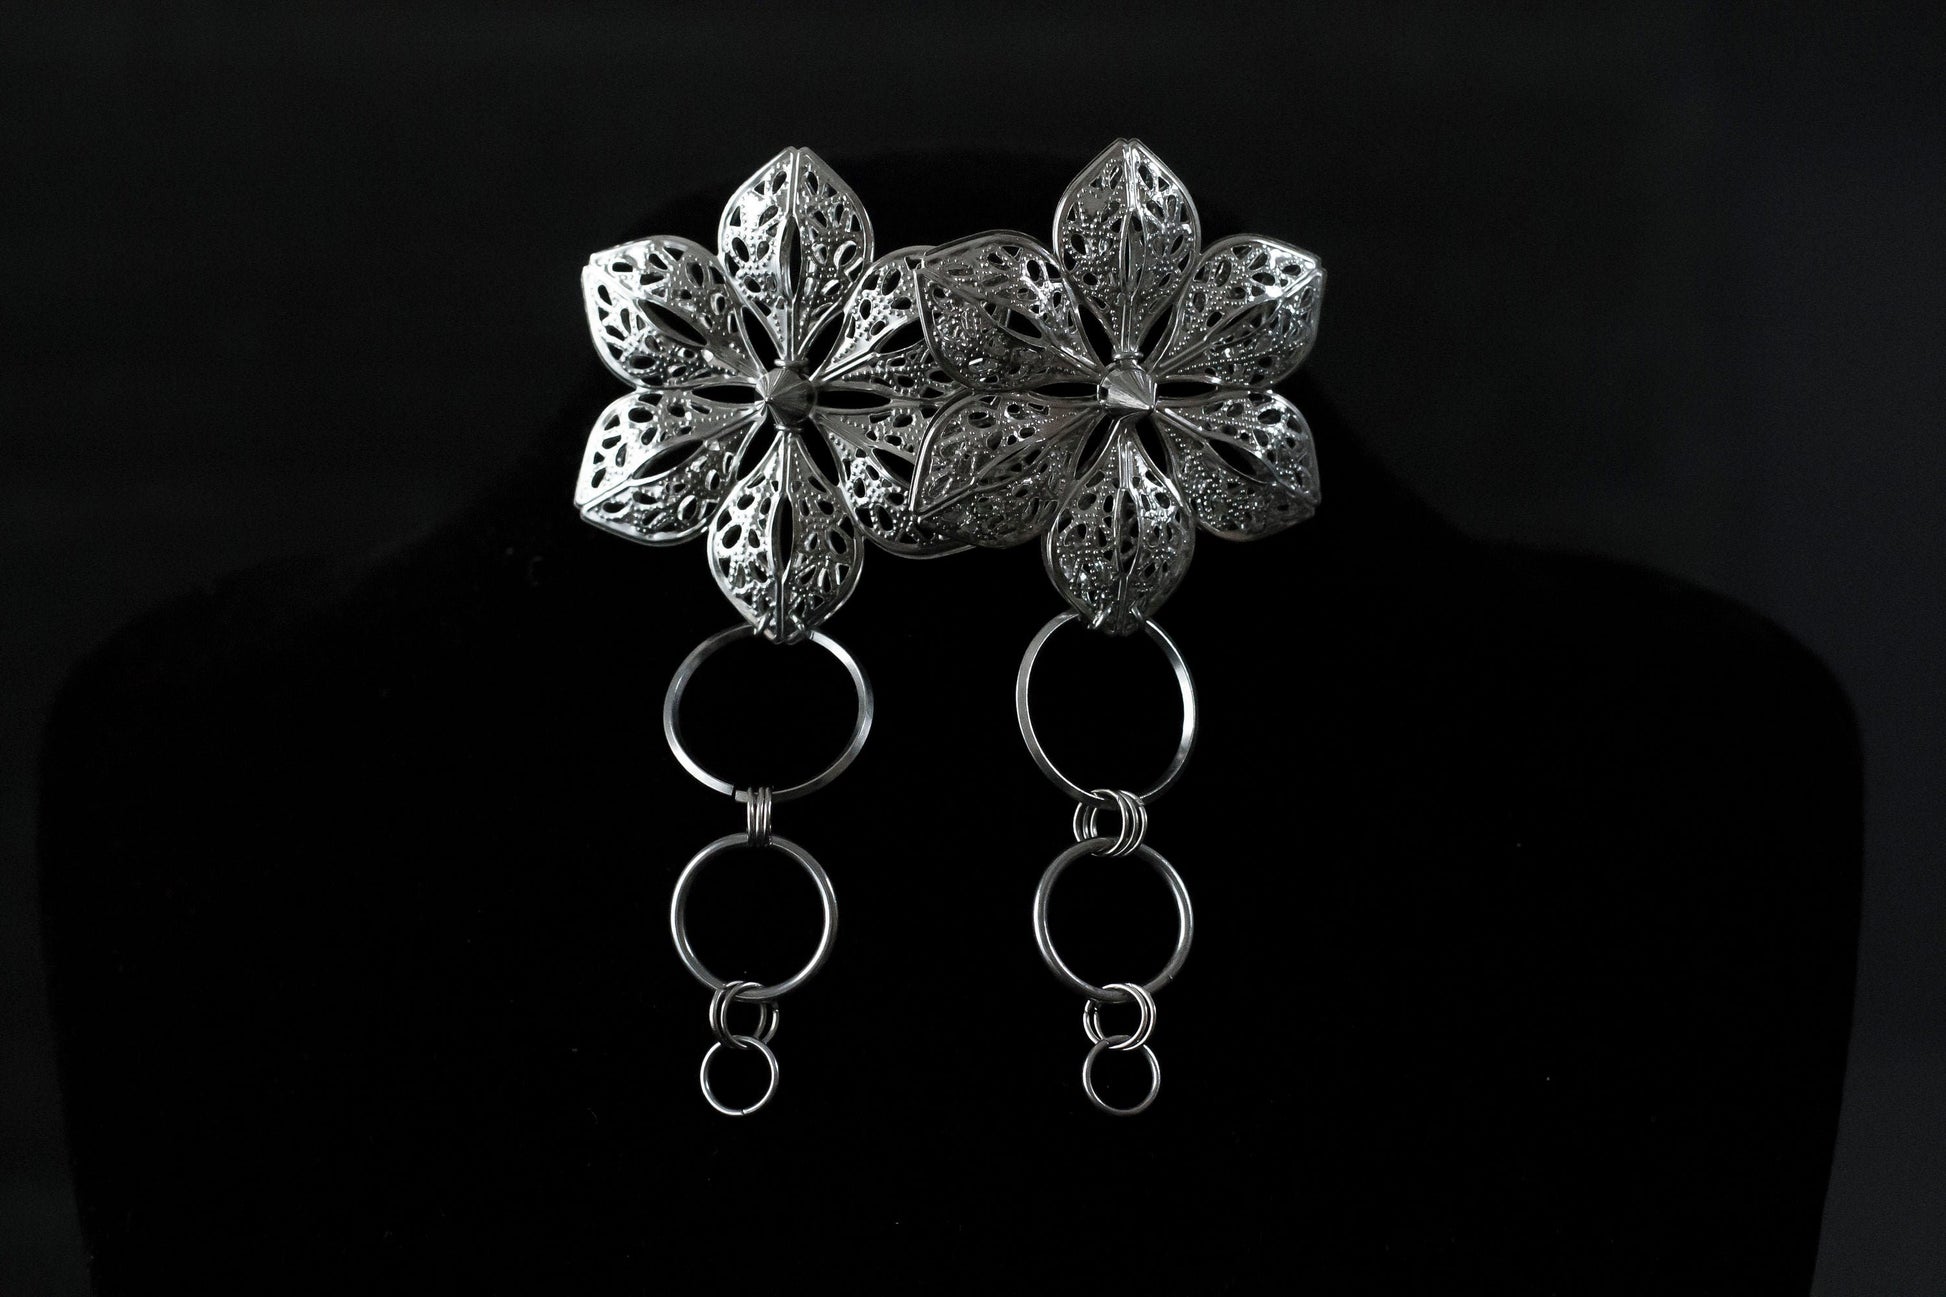 Stand out with Myril Jewels' handcrafted punk studded floral earrings, where dark avant-garde meets sophisticated design. Ideal for gothic and alternative style aficionados, these earrings are a testament to the brand's Neo Gothic roots, perfect for enhancing Gothic Lolita, Gothic-chic, or whimsigoth looks. They're also a captivating choice for Halloween jewelry or adding an elegant witchcore touch to everyday minimal goth outfits